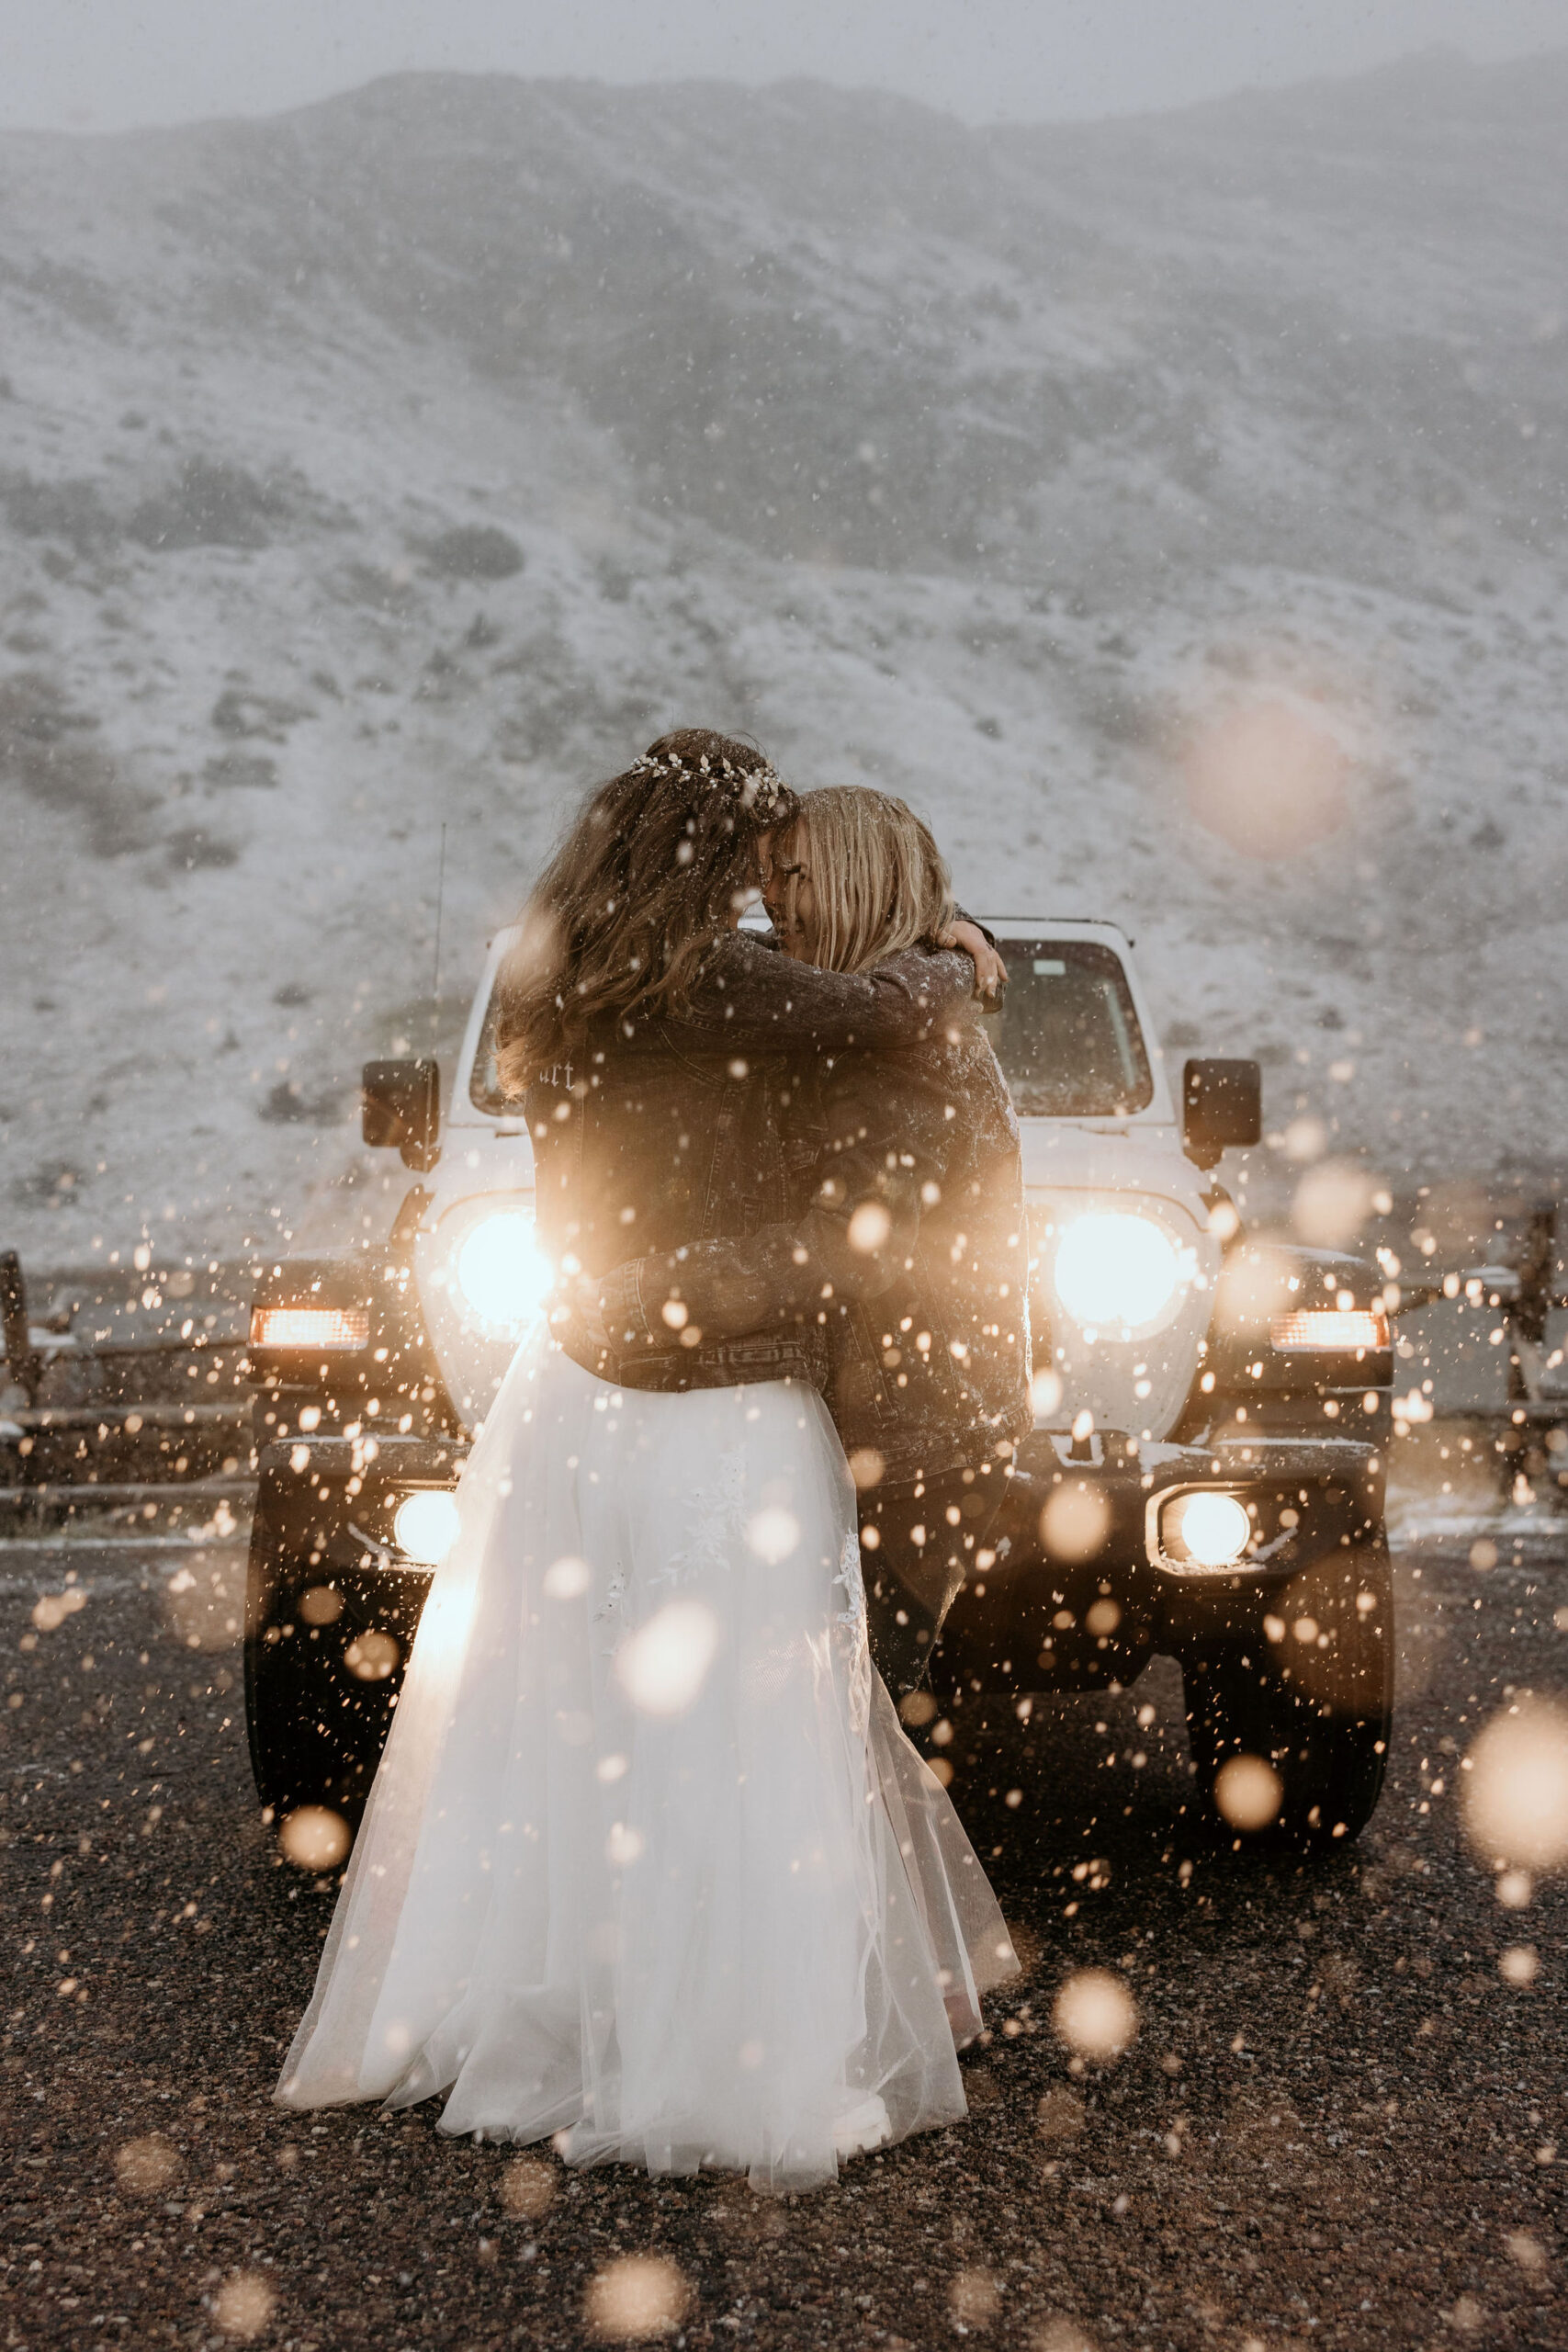 LGBTQ+ couple hugs in front of jeep in the snow during stress-free wedding.